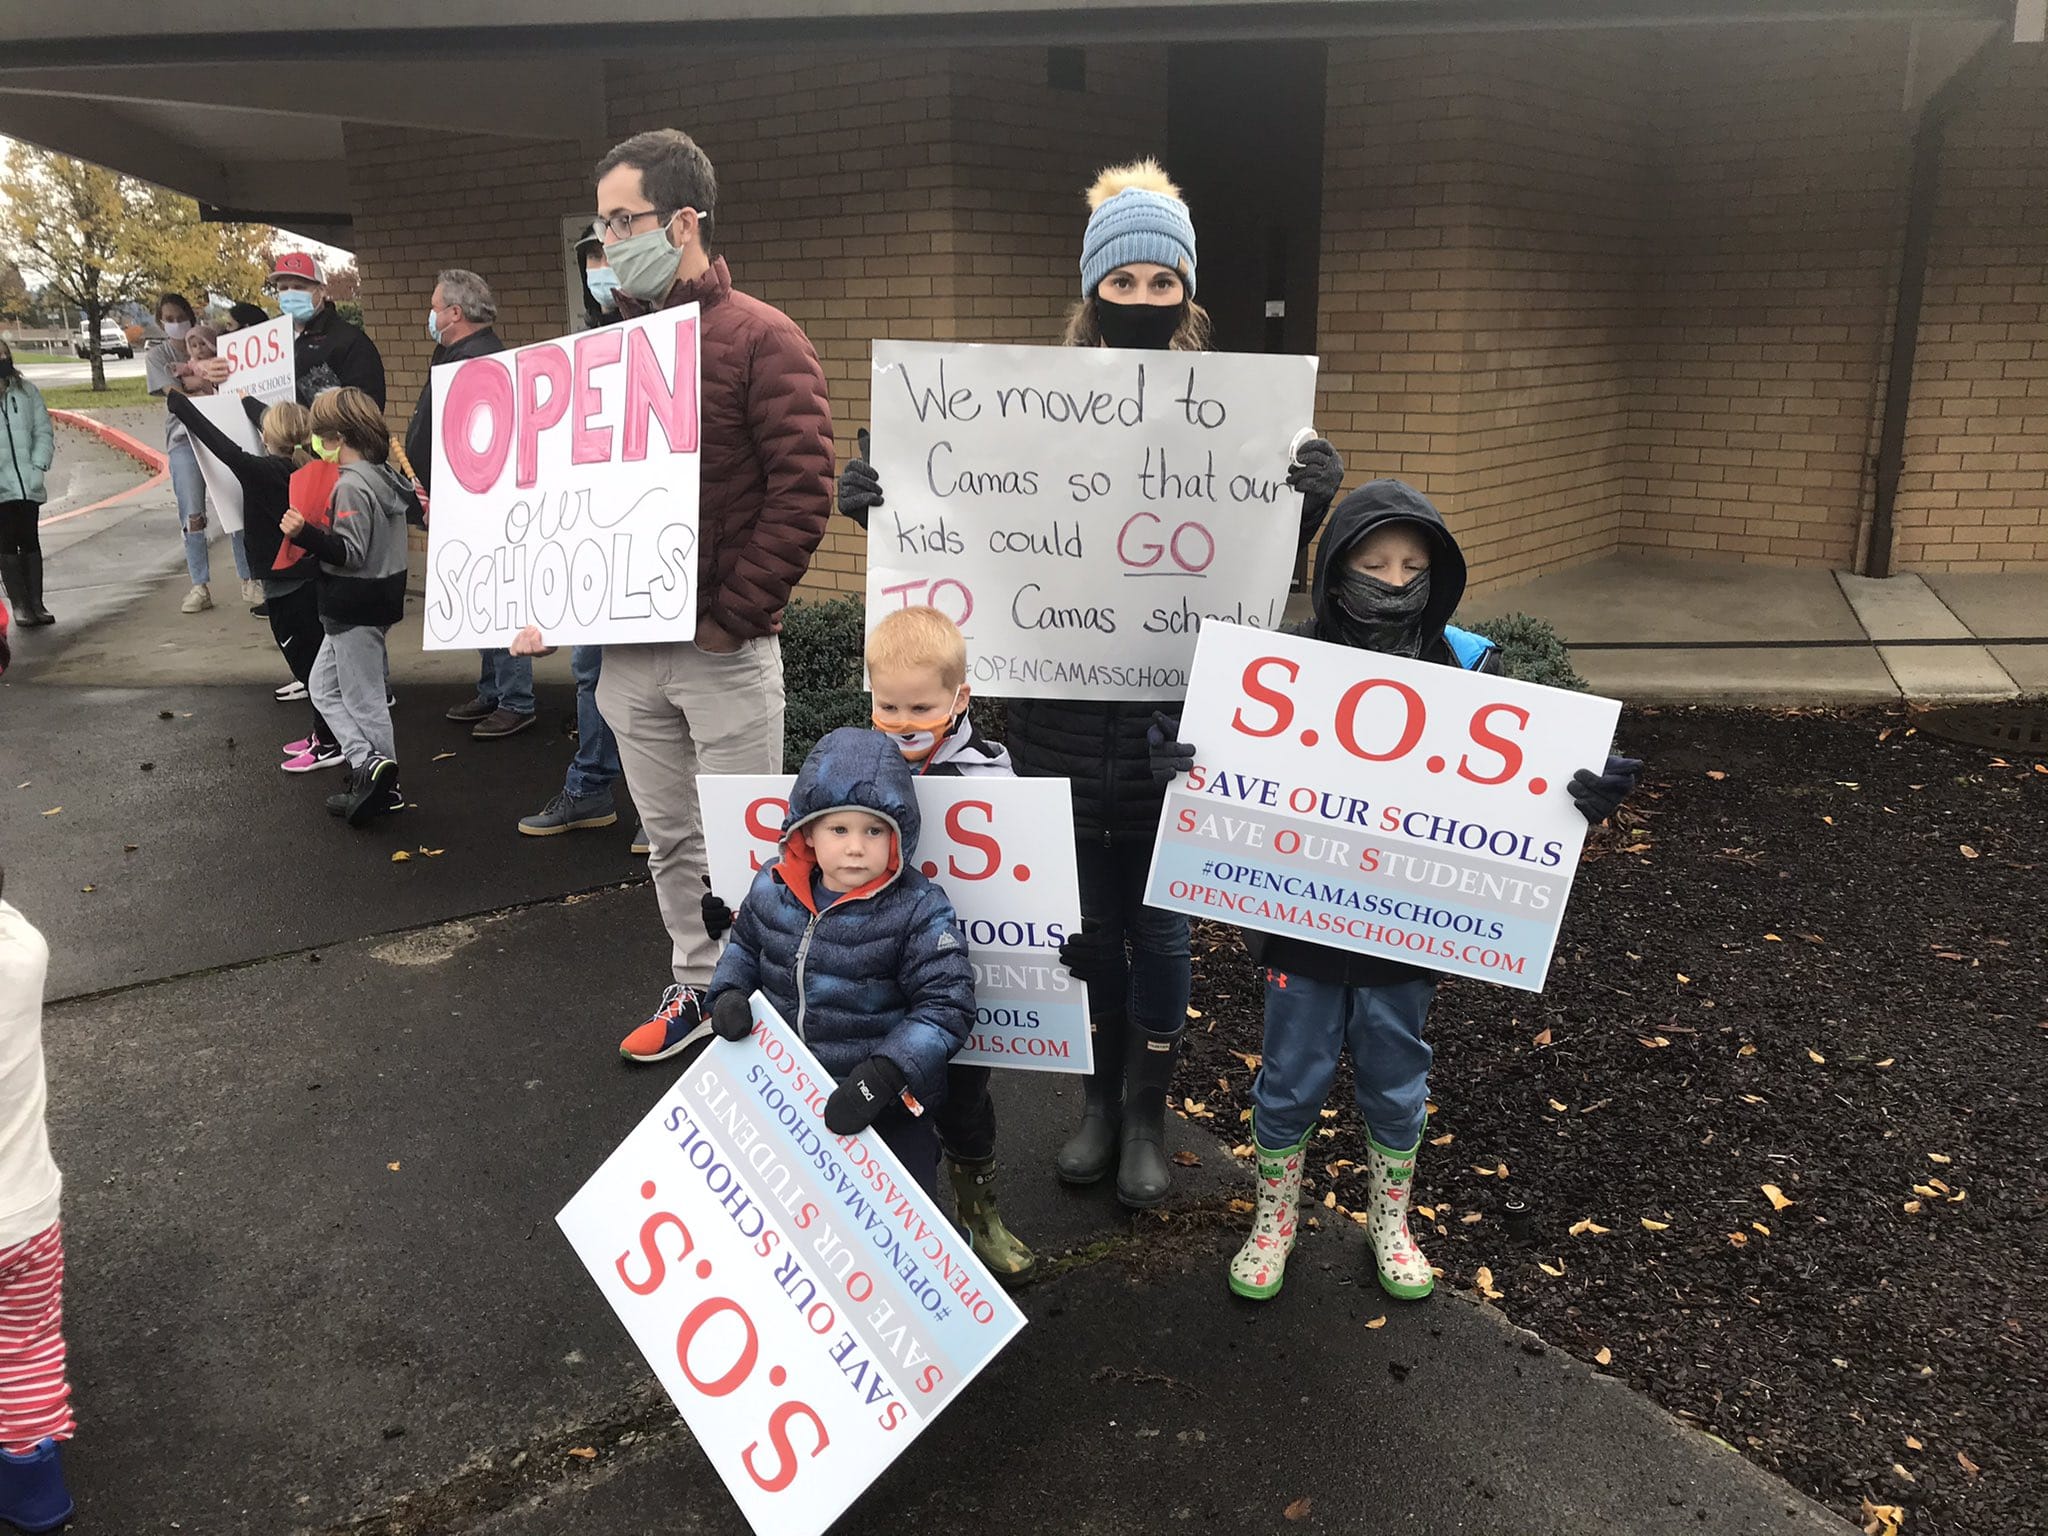 Mindy O’Neil has a second-grader in the Camas School District and two pre-schoolers who are attending in-person. “My second grader is at home watching his brothers go to school, and I just feel like his mental health is suffering.